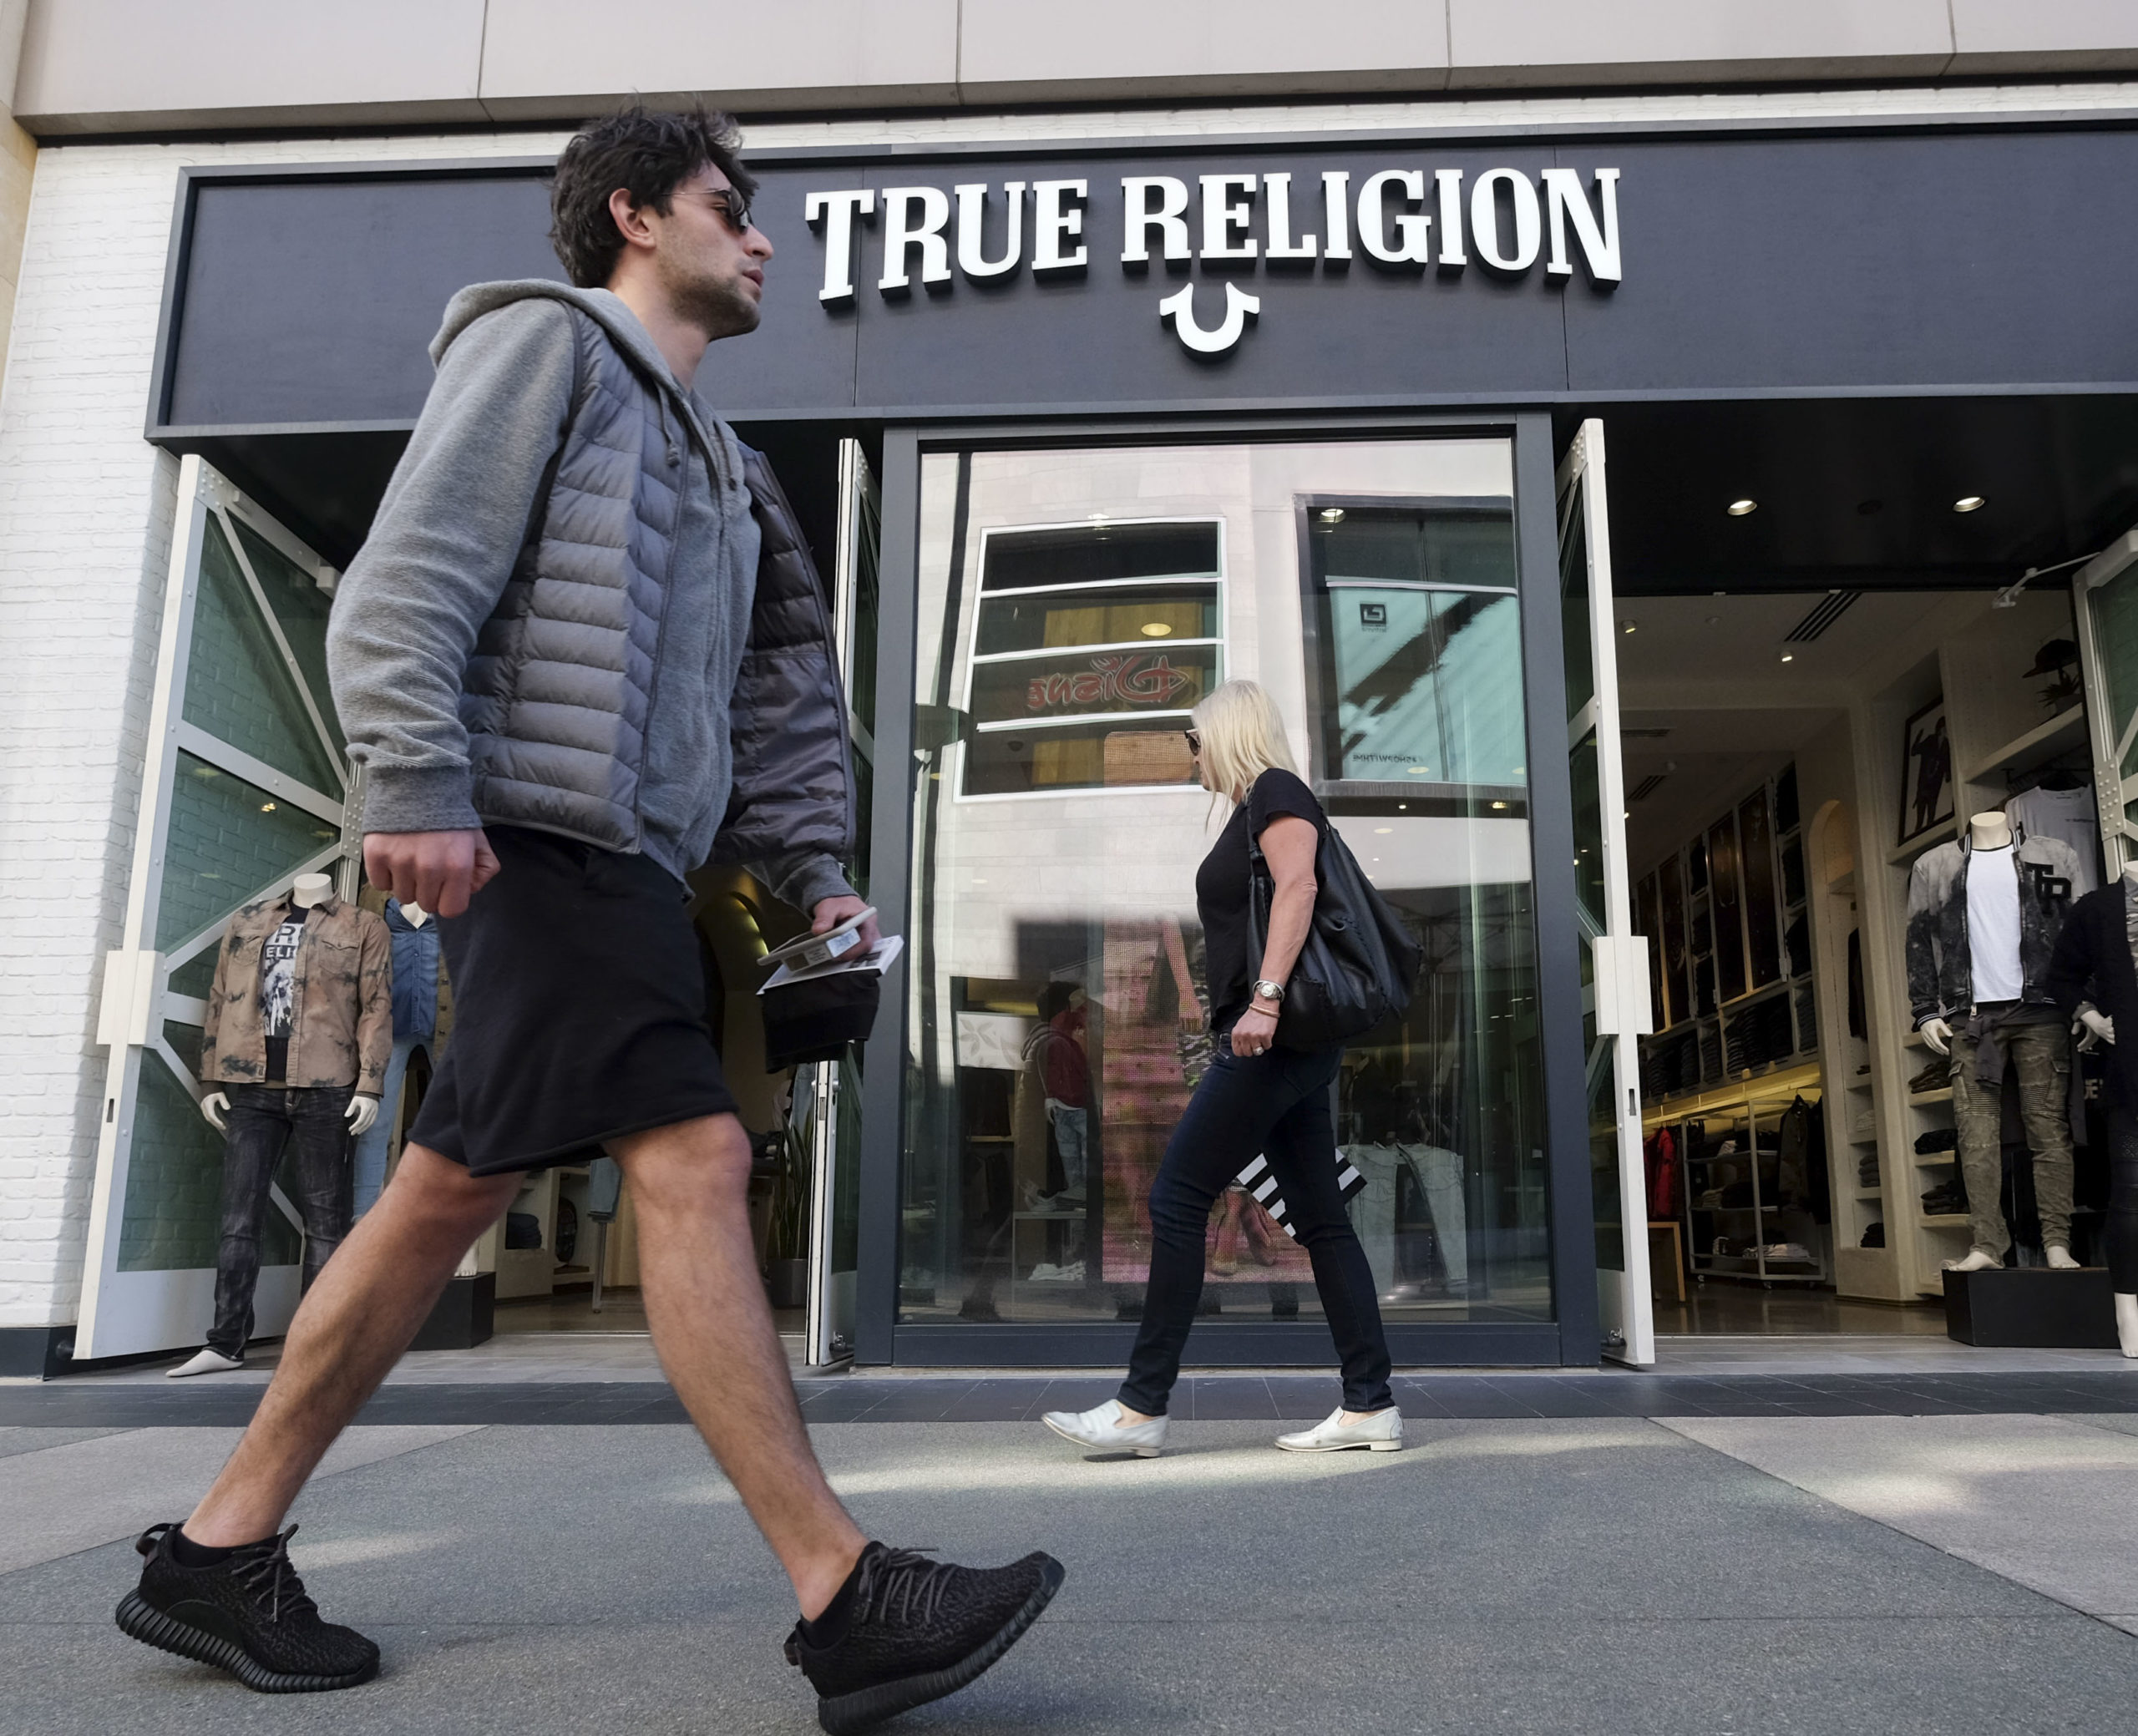 True Religion to Exit Bankruptcy - Los Angeles Business Journal image